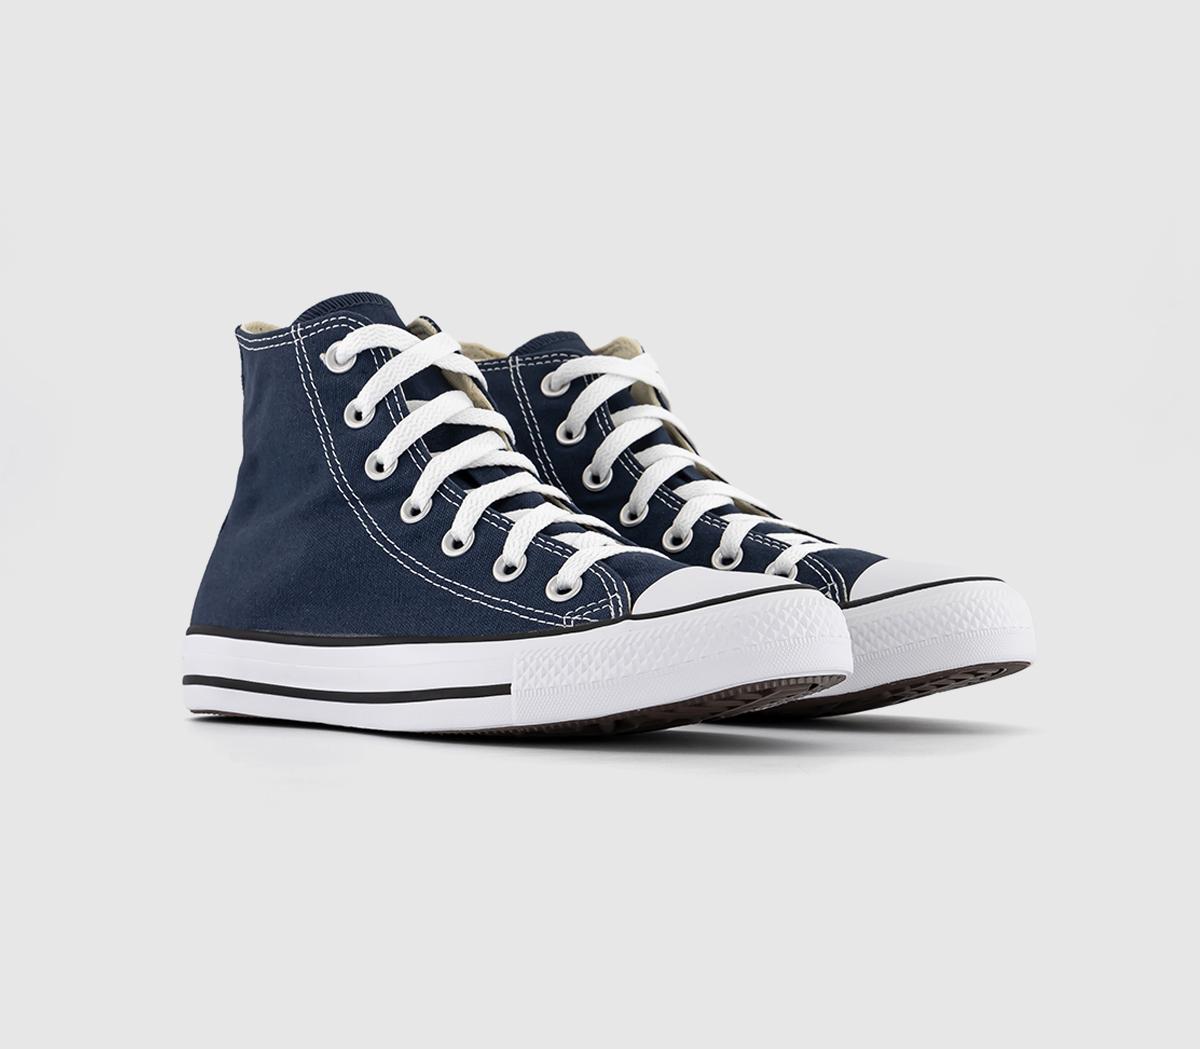 Mens Converse All Star Hi Canvas Trainers In Navy Blue And White, 10